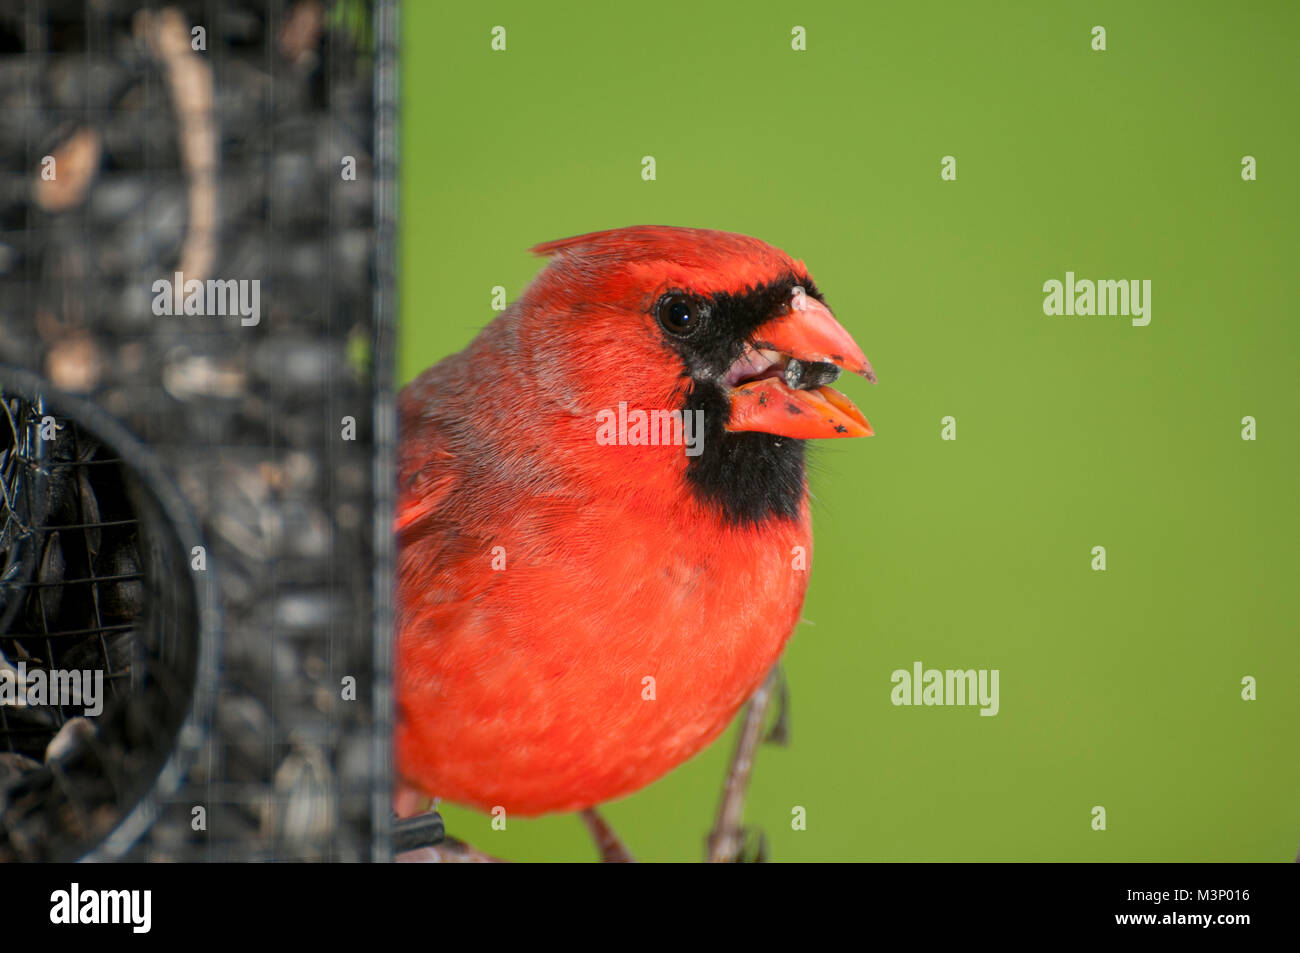 Vadnais Heights, Minnesota.  Male Northern Cardinal, Cardinalis cardinalis, eating sunflower seed from a bird feeder with a green background. Stock Photo